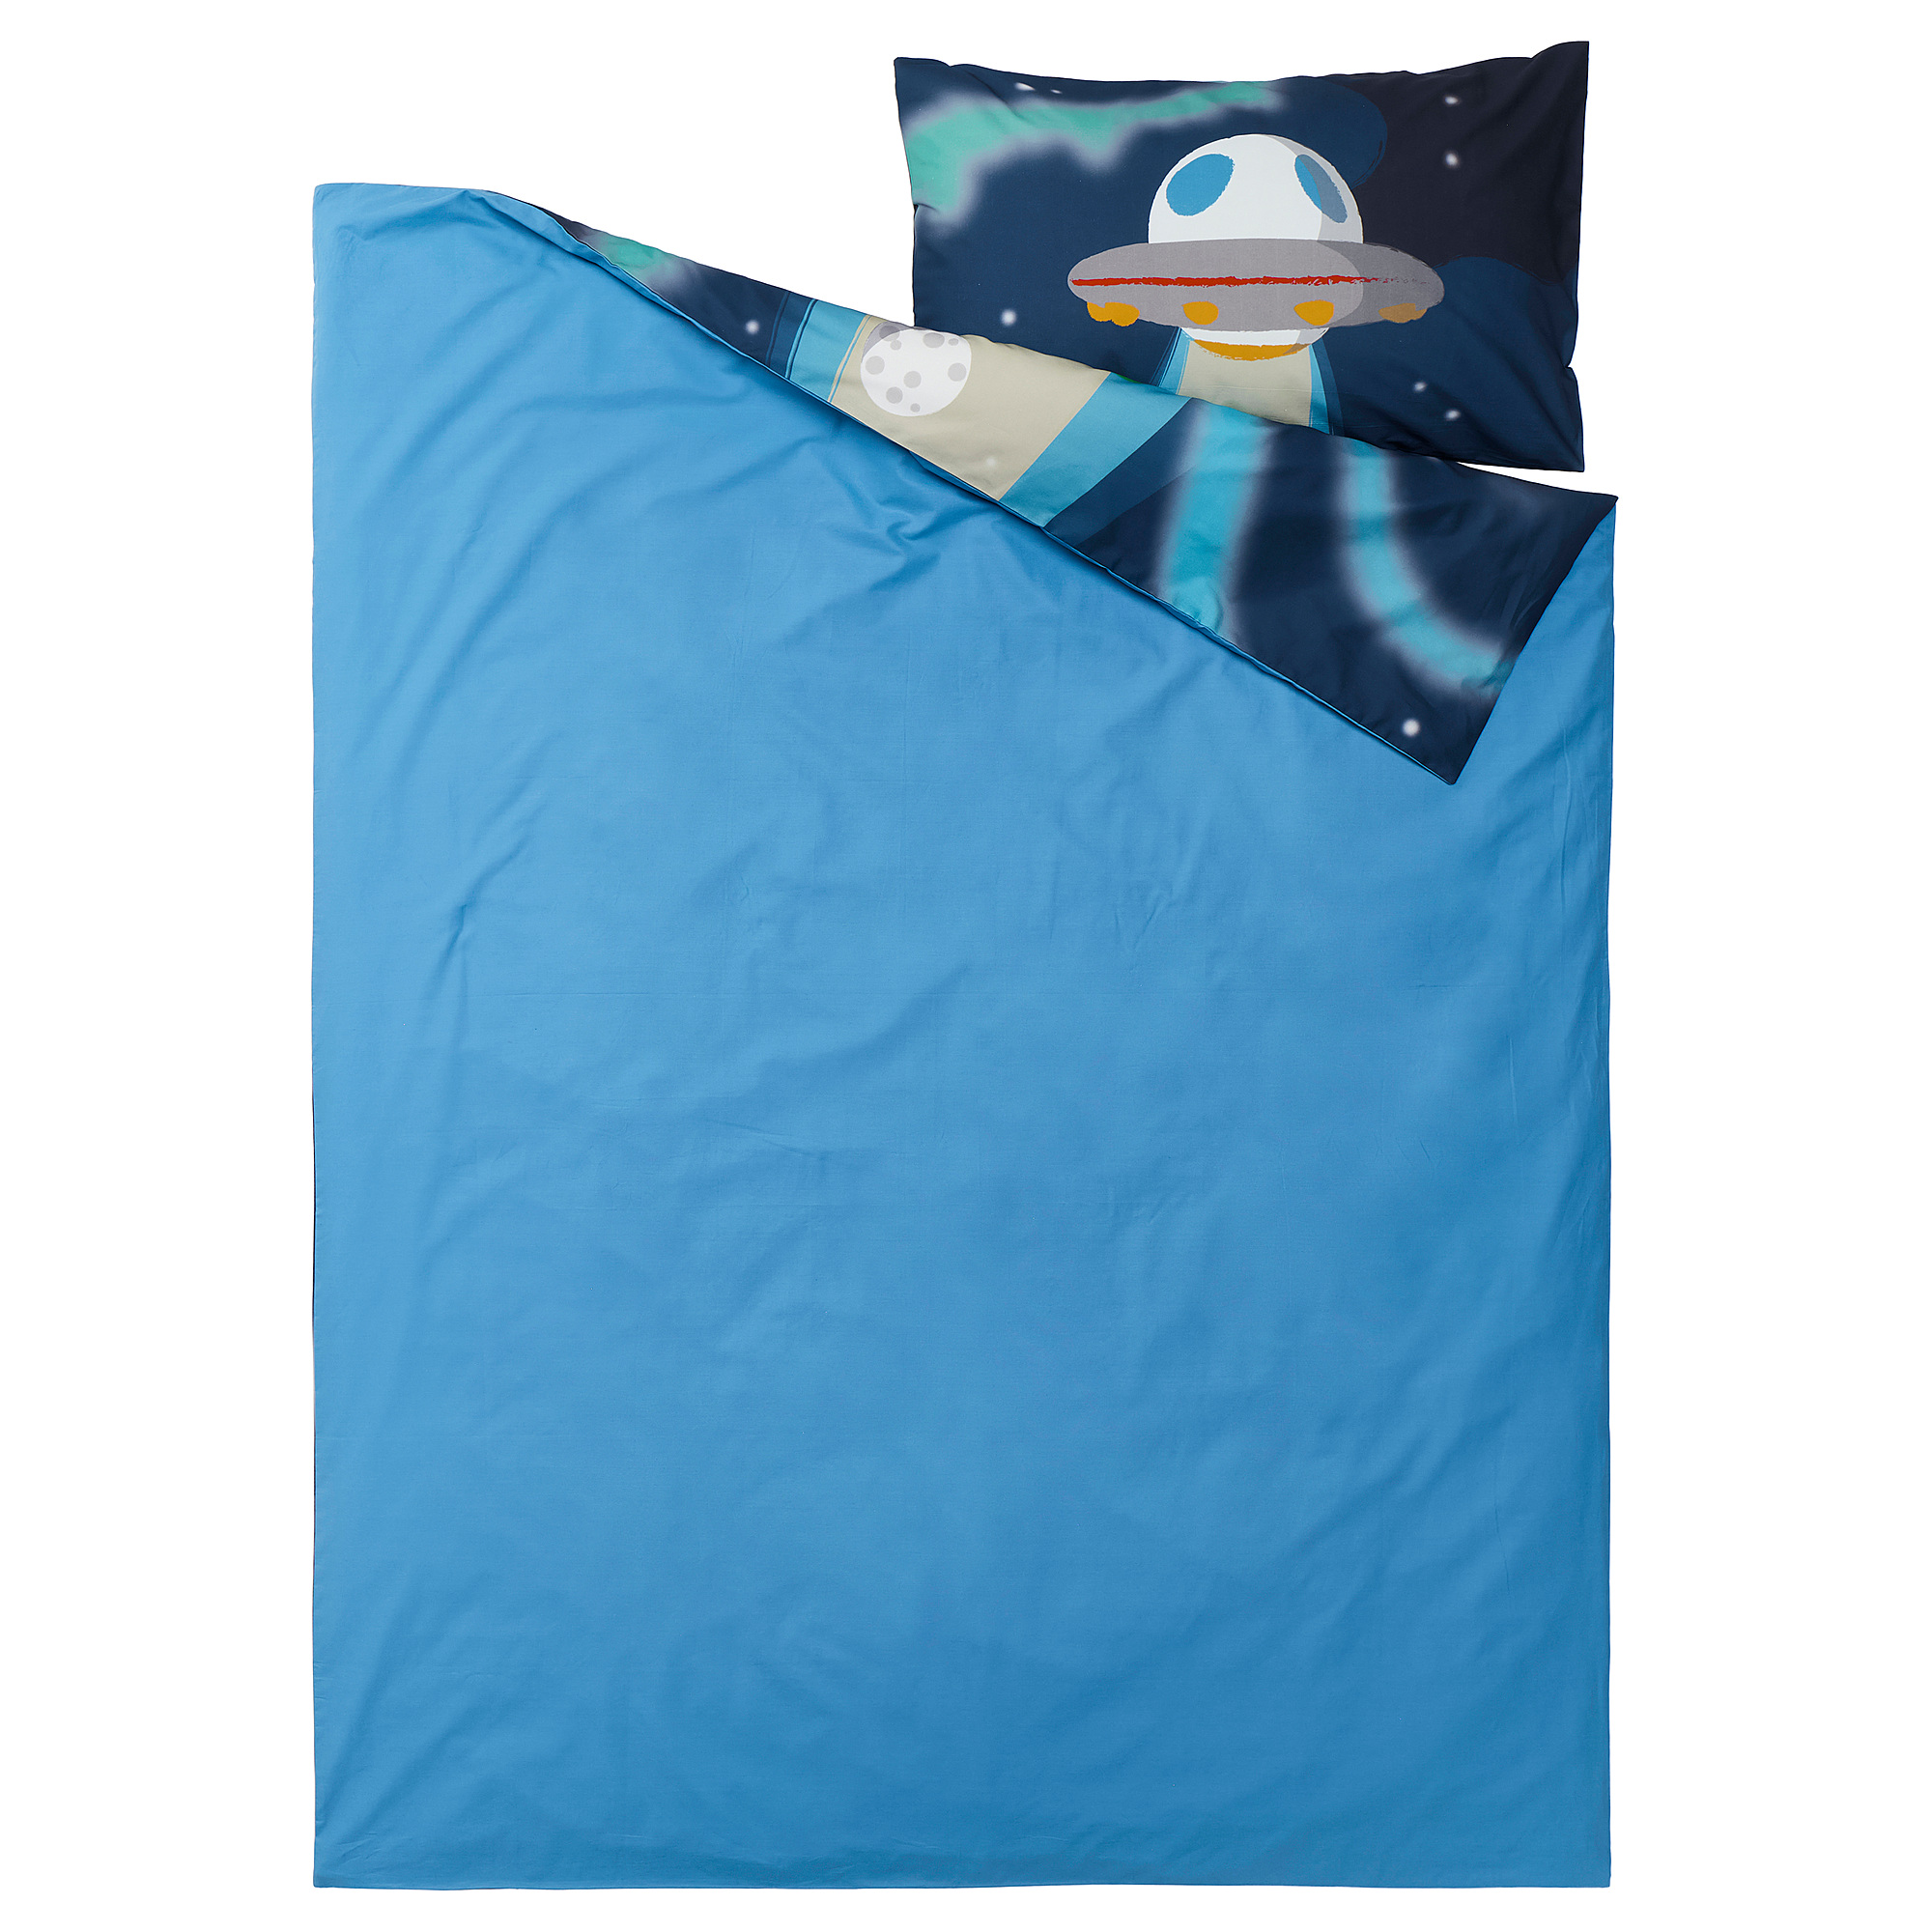 AFTONSPARV duvet cover and pillowcase